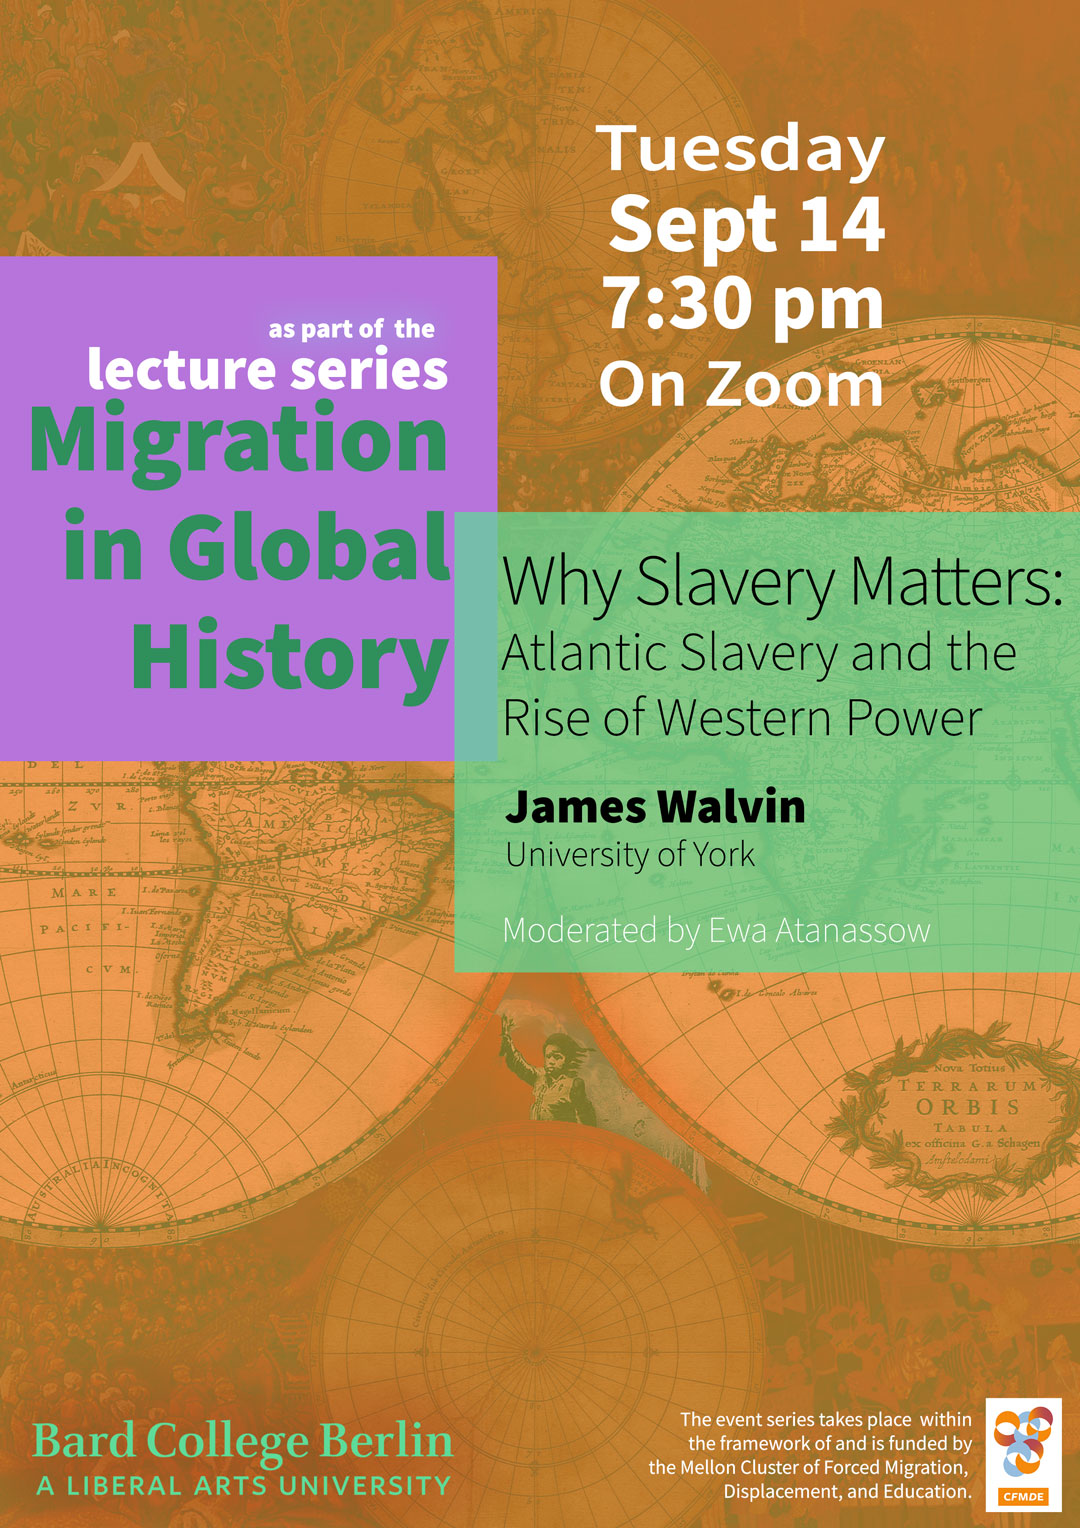 James Walvin &ndash; Why Slavery Matters: Atlantic Slavery and the Rise of Western Power